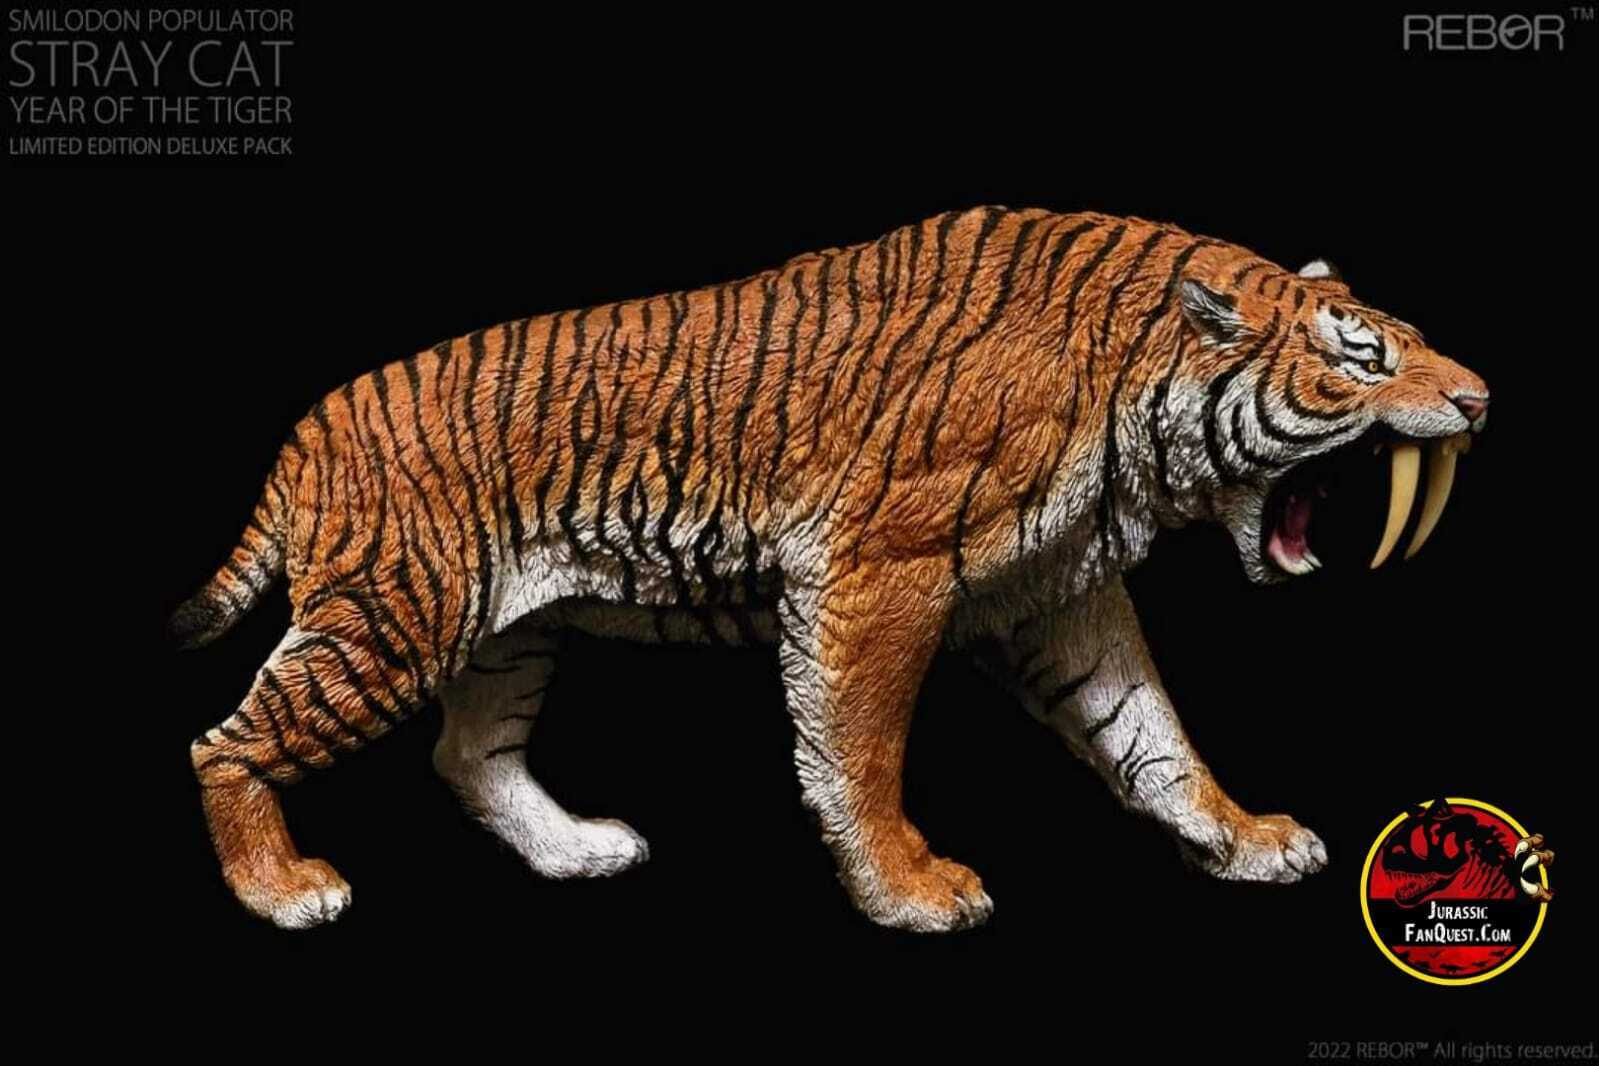 REBOR Smilodon Populator Stray Cat Model Year of the Tiger Limited Edition